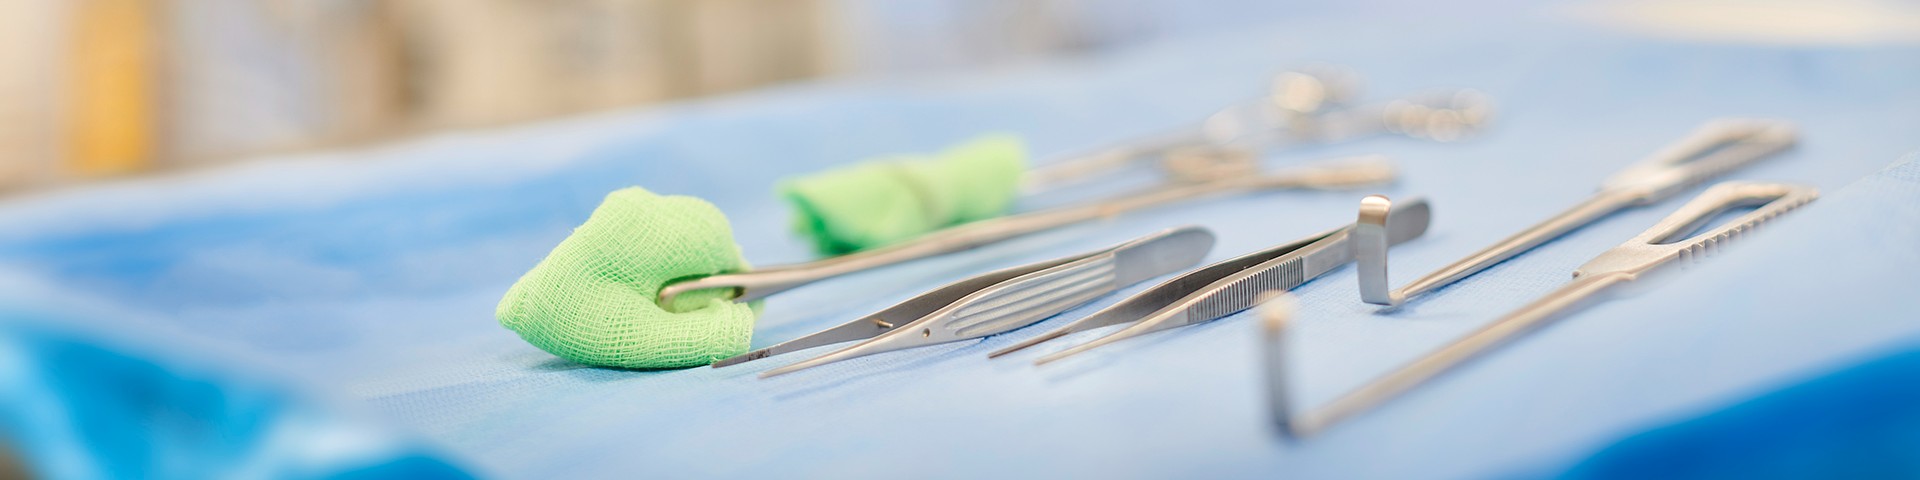 Surgical instruments on a table